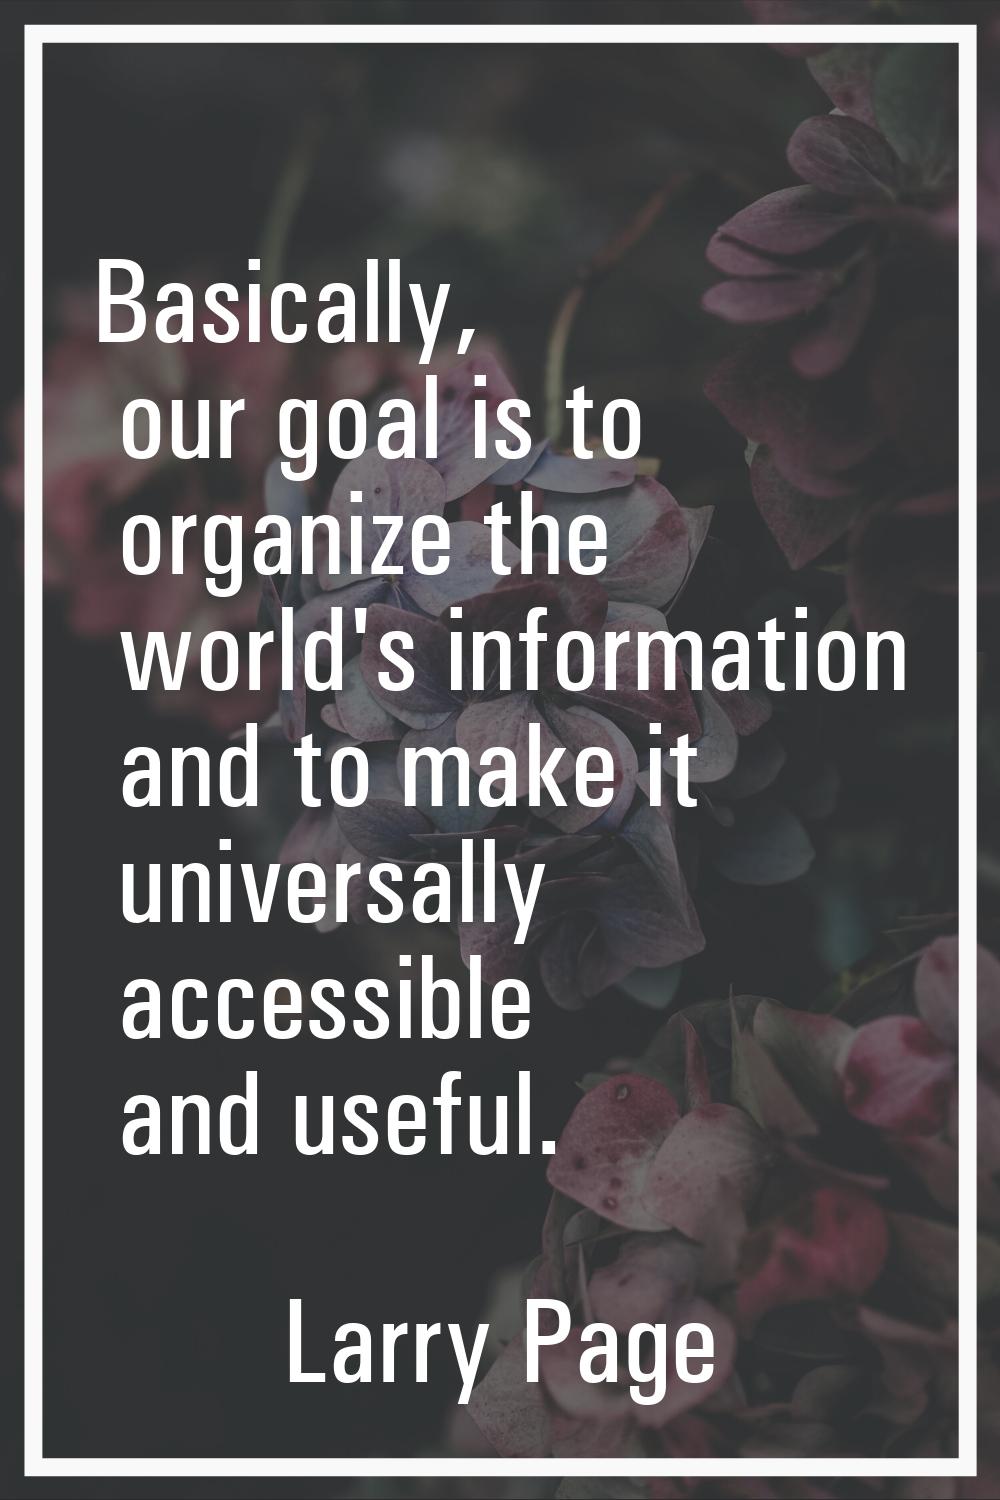 Basically, our goal is to organize the world's information and to make it universally accessible an